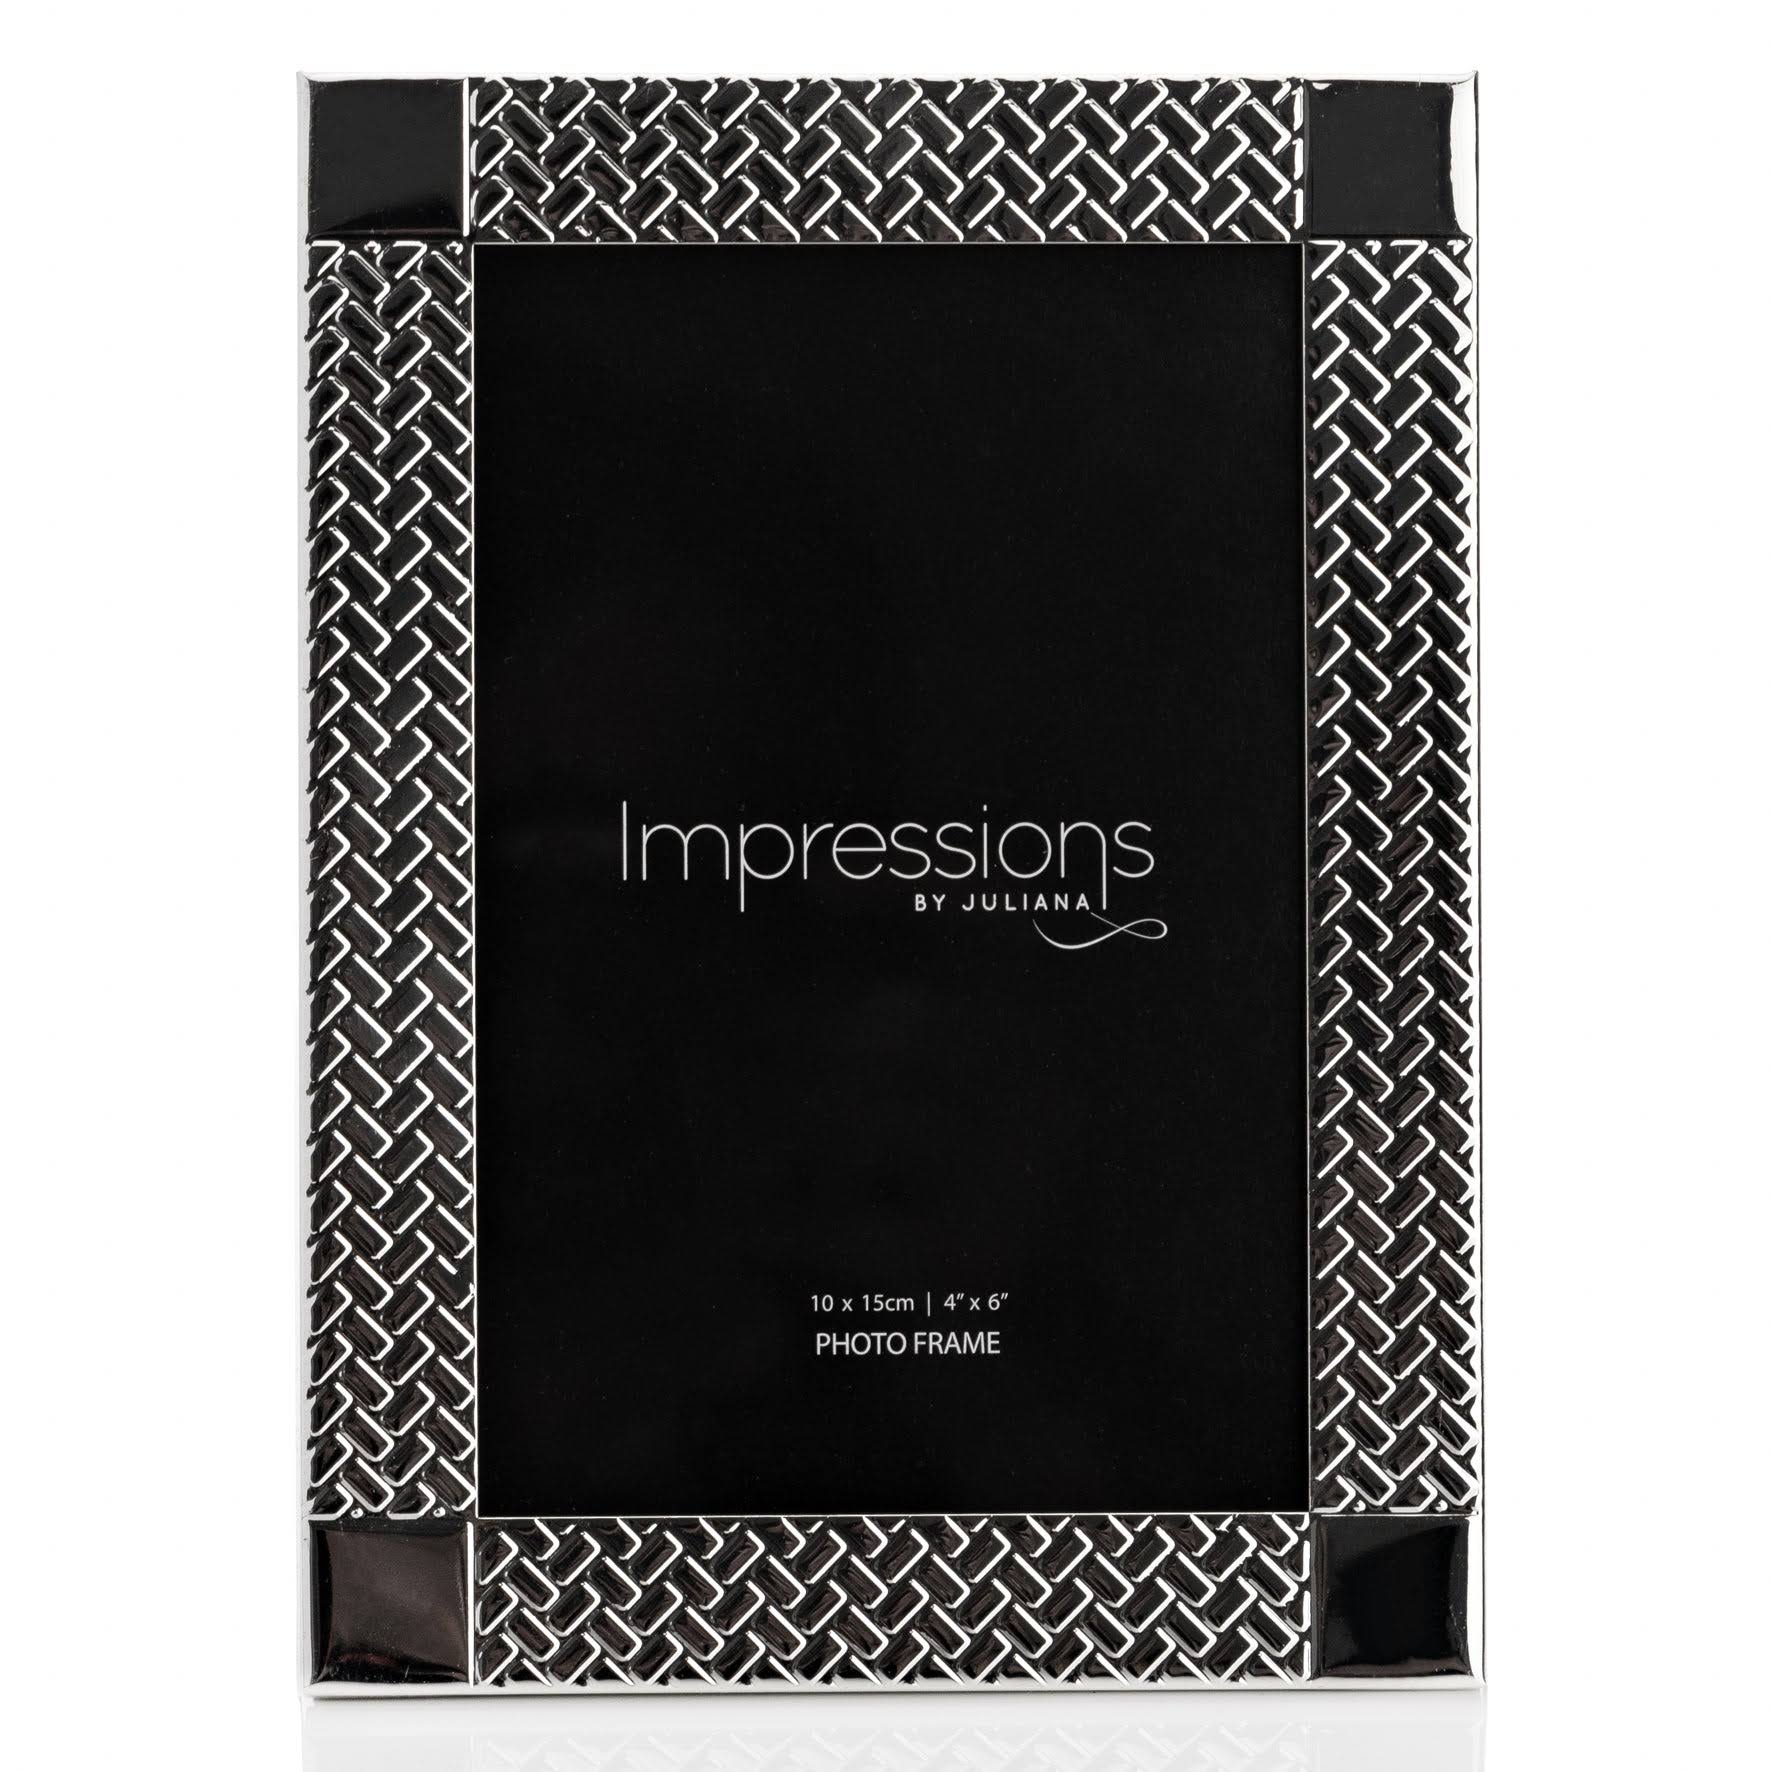 Impressions Woven Pattern Silver-Plated Frame 4" X 6"